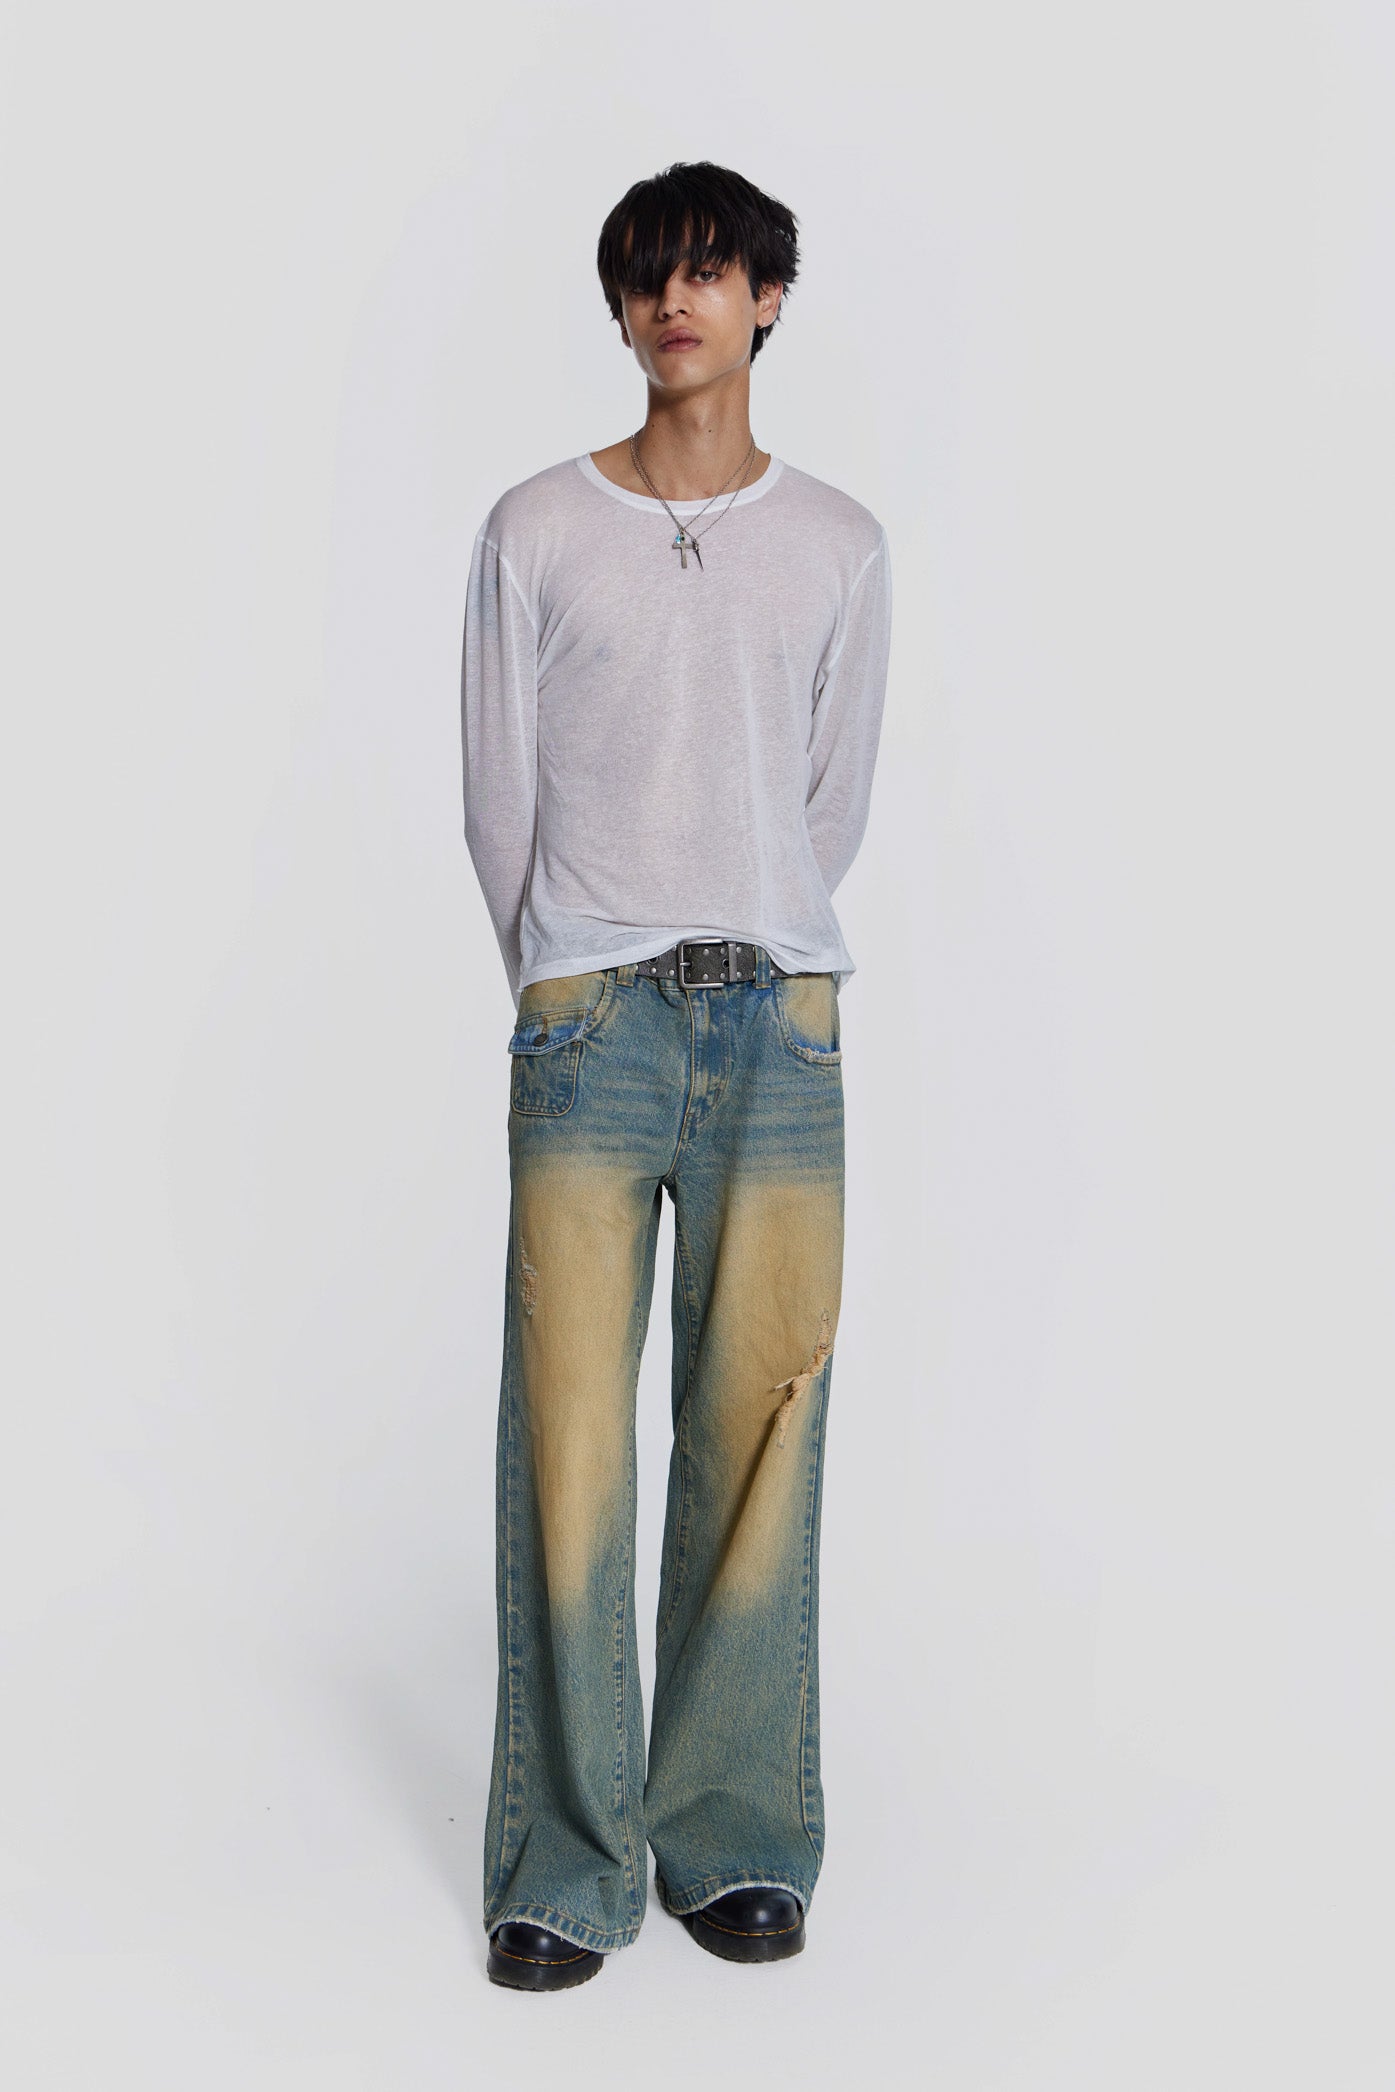 Washed Blue Panelled Straight Fit Jeans | Jaded London - W28 / Blue